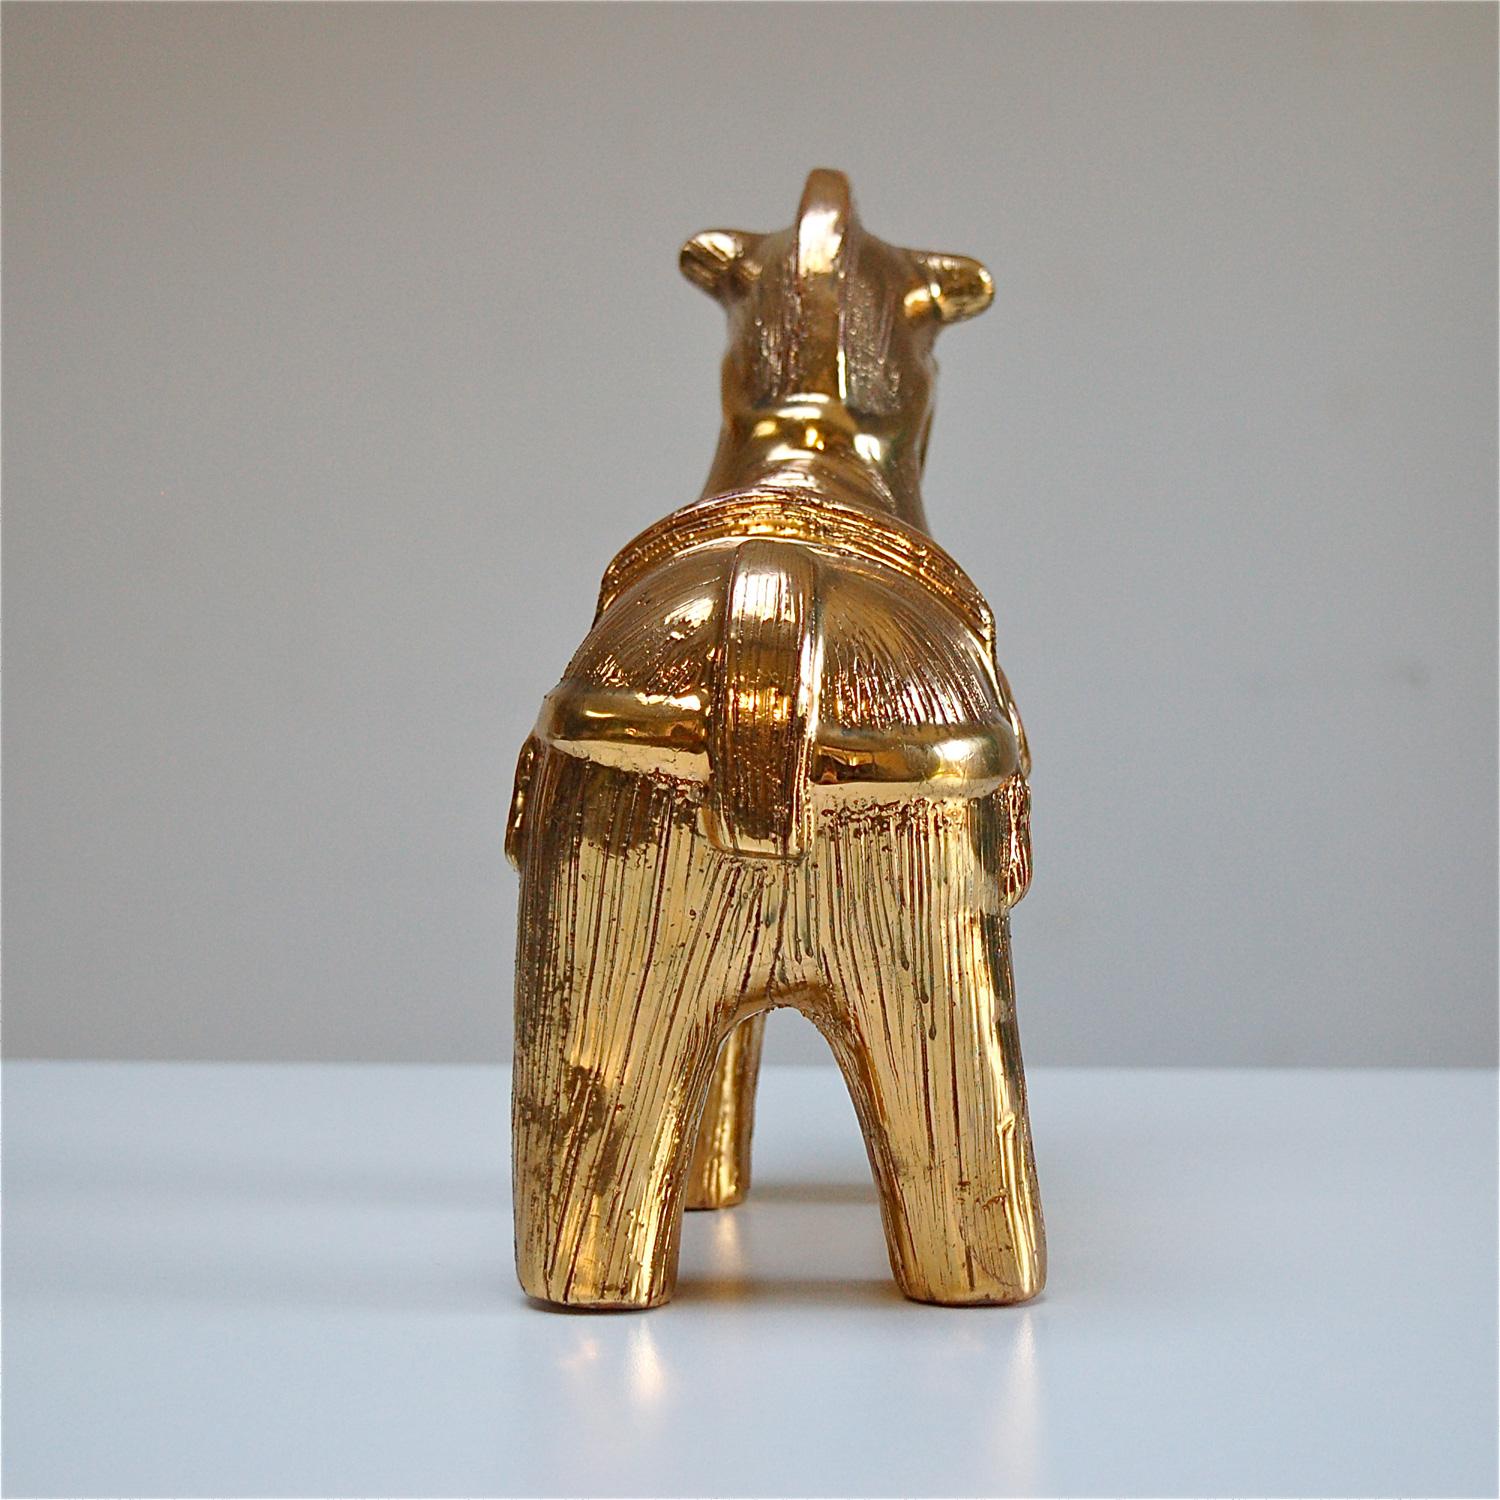 Glazed Ceramic Horse Sculpture by Bitossi in Gilt Glaze, Italy, 1960s For Sale